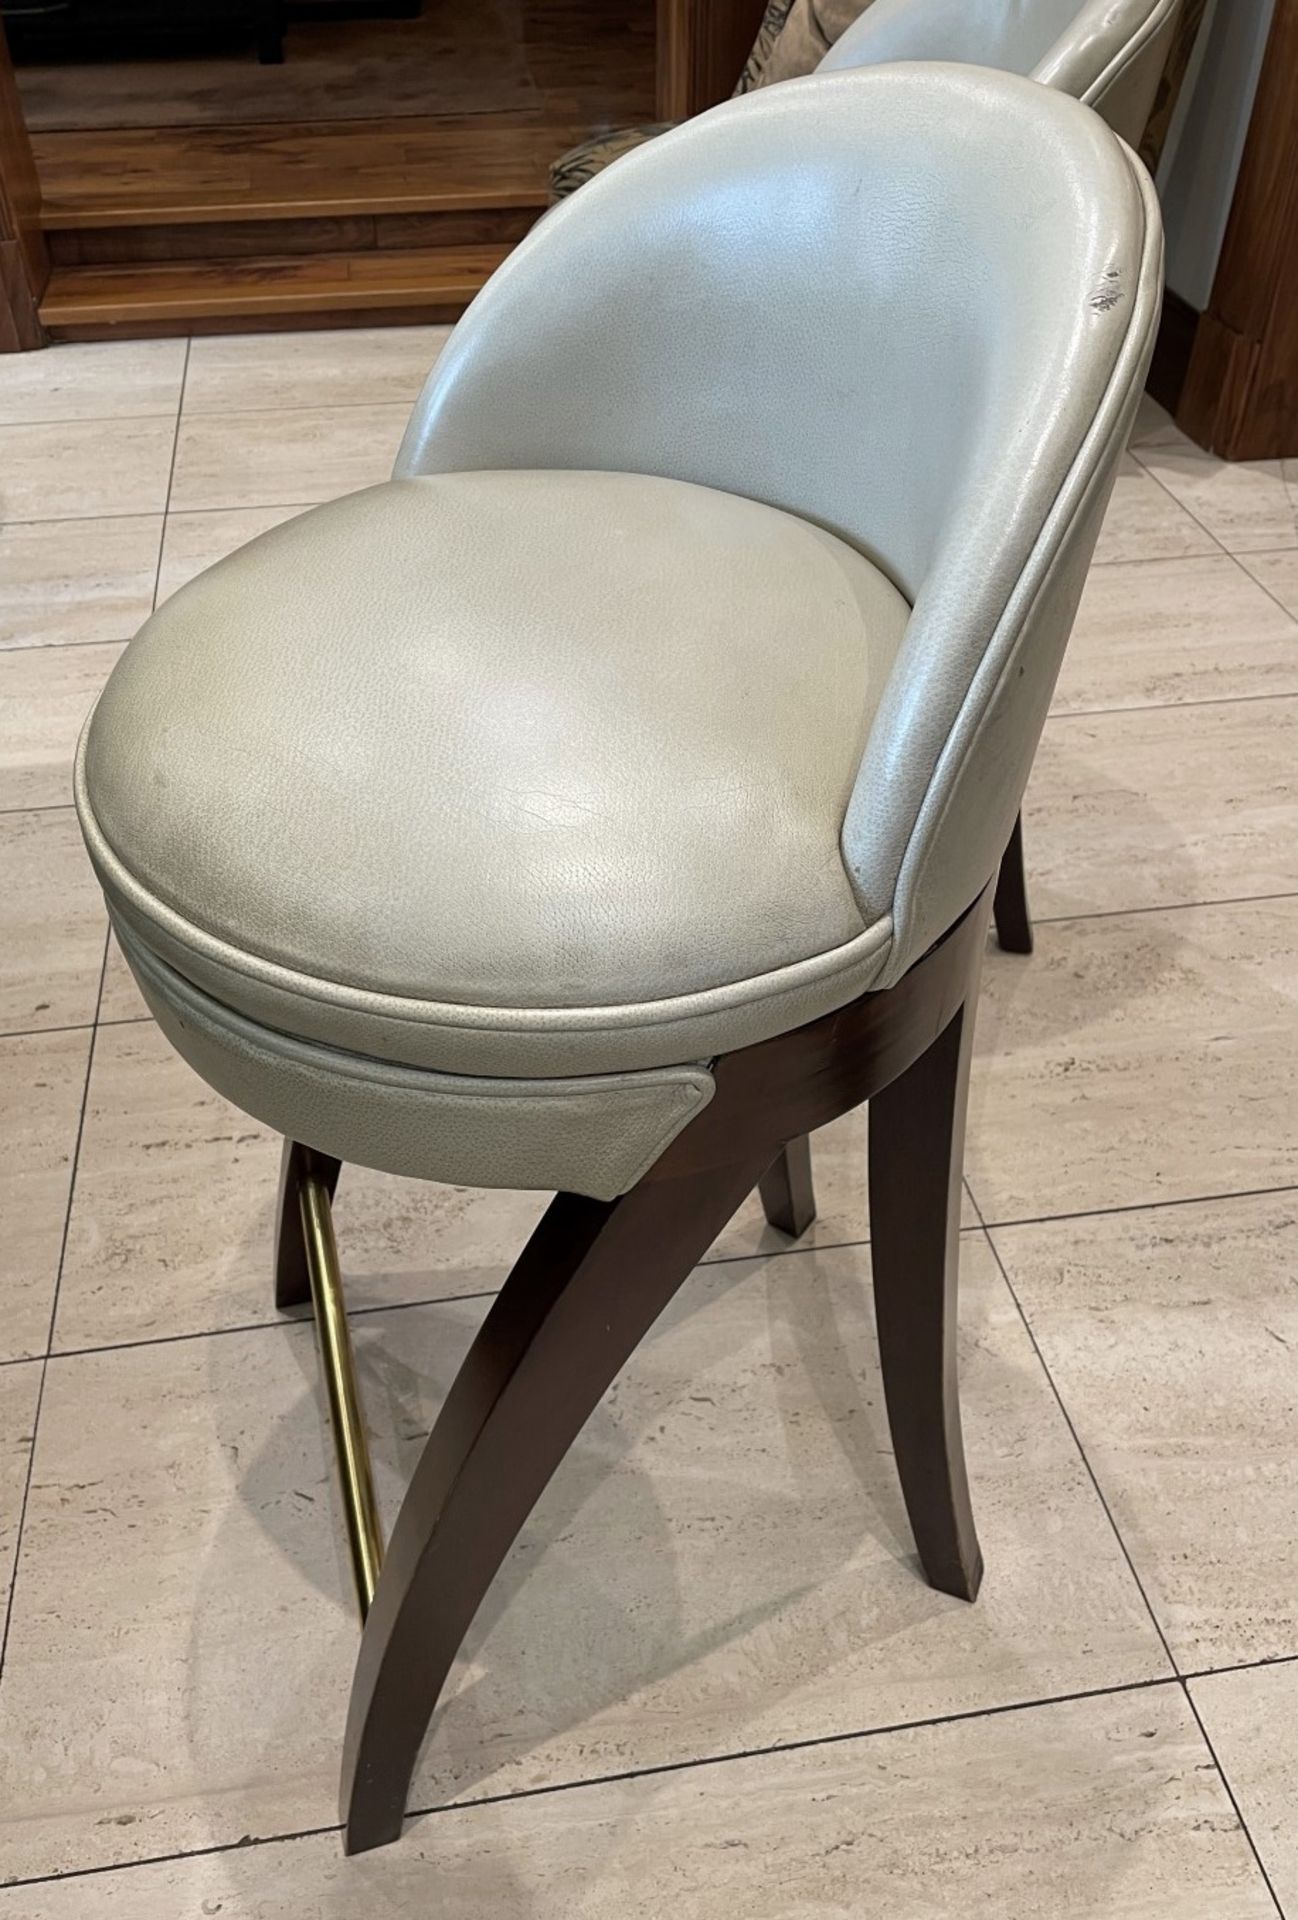 5 x Luxury Leather 360 Degree Bar Stools In Light Grey With Curved Wooden Bases In Wenge - NO VAT - Image 2 of 13